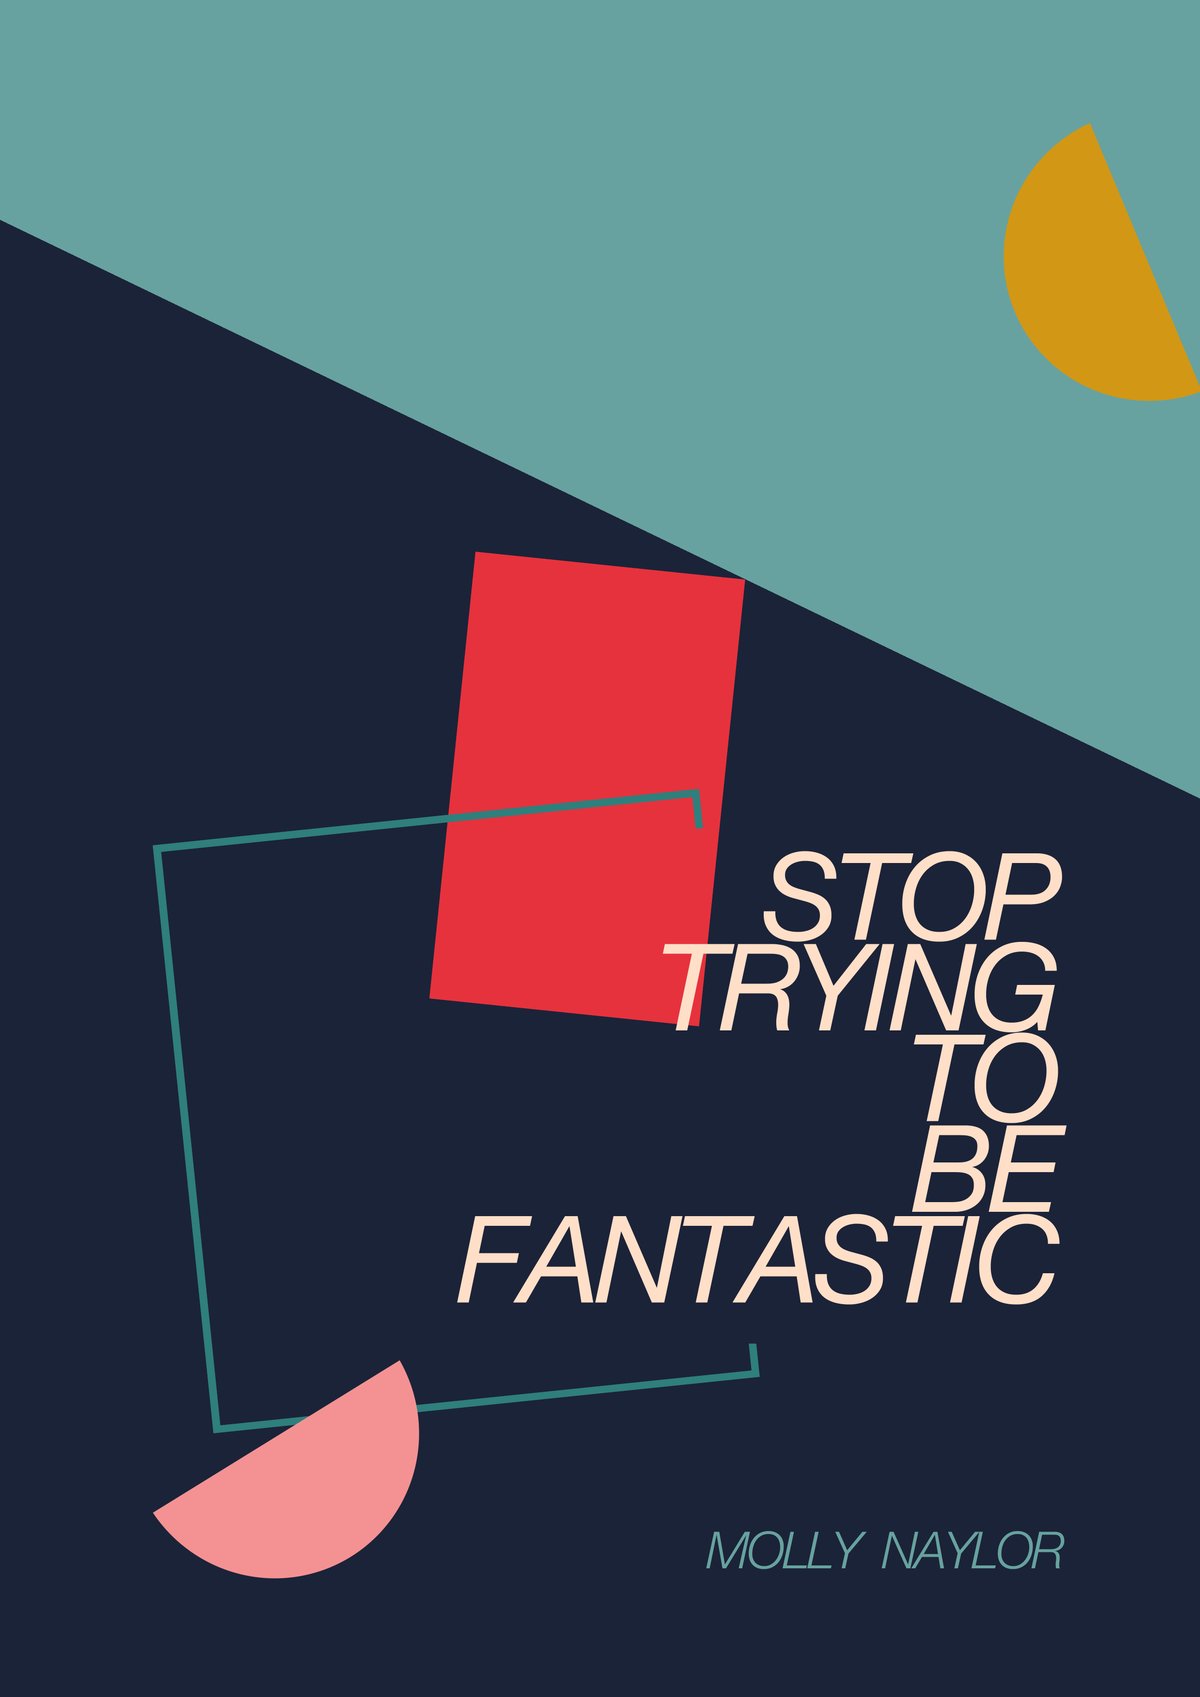 Image of Stop Trying To Be Fantastic by Molly Naylor